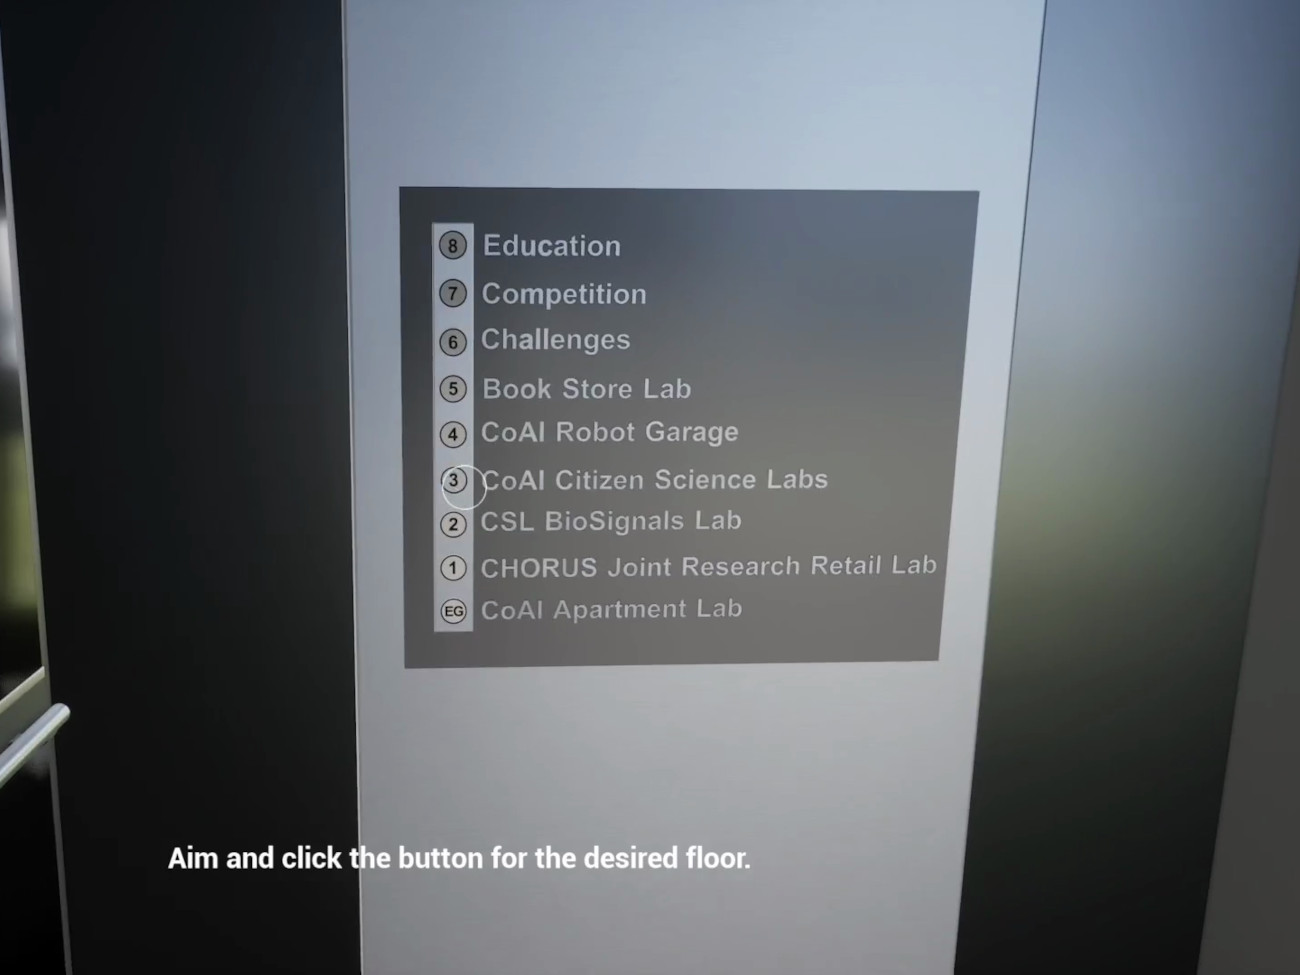 A sign in the virtual building which informs about the virtual floors